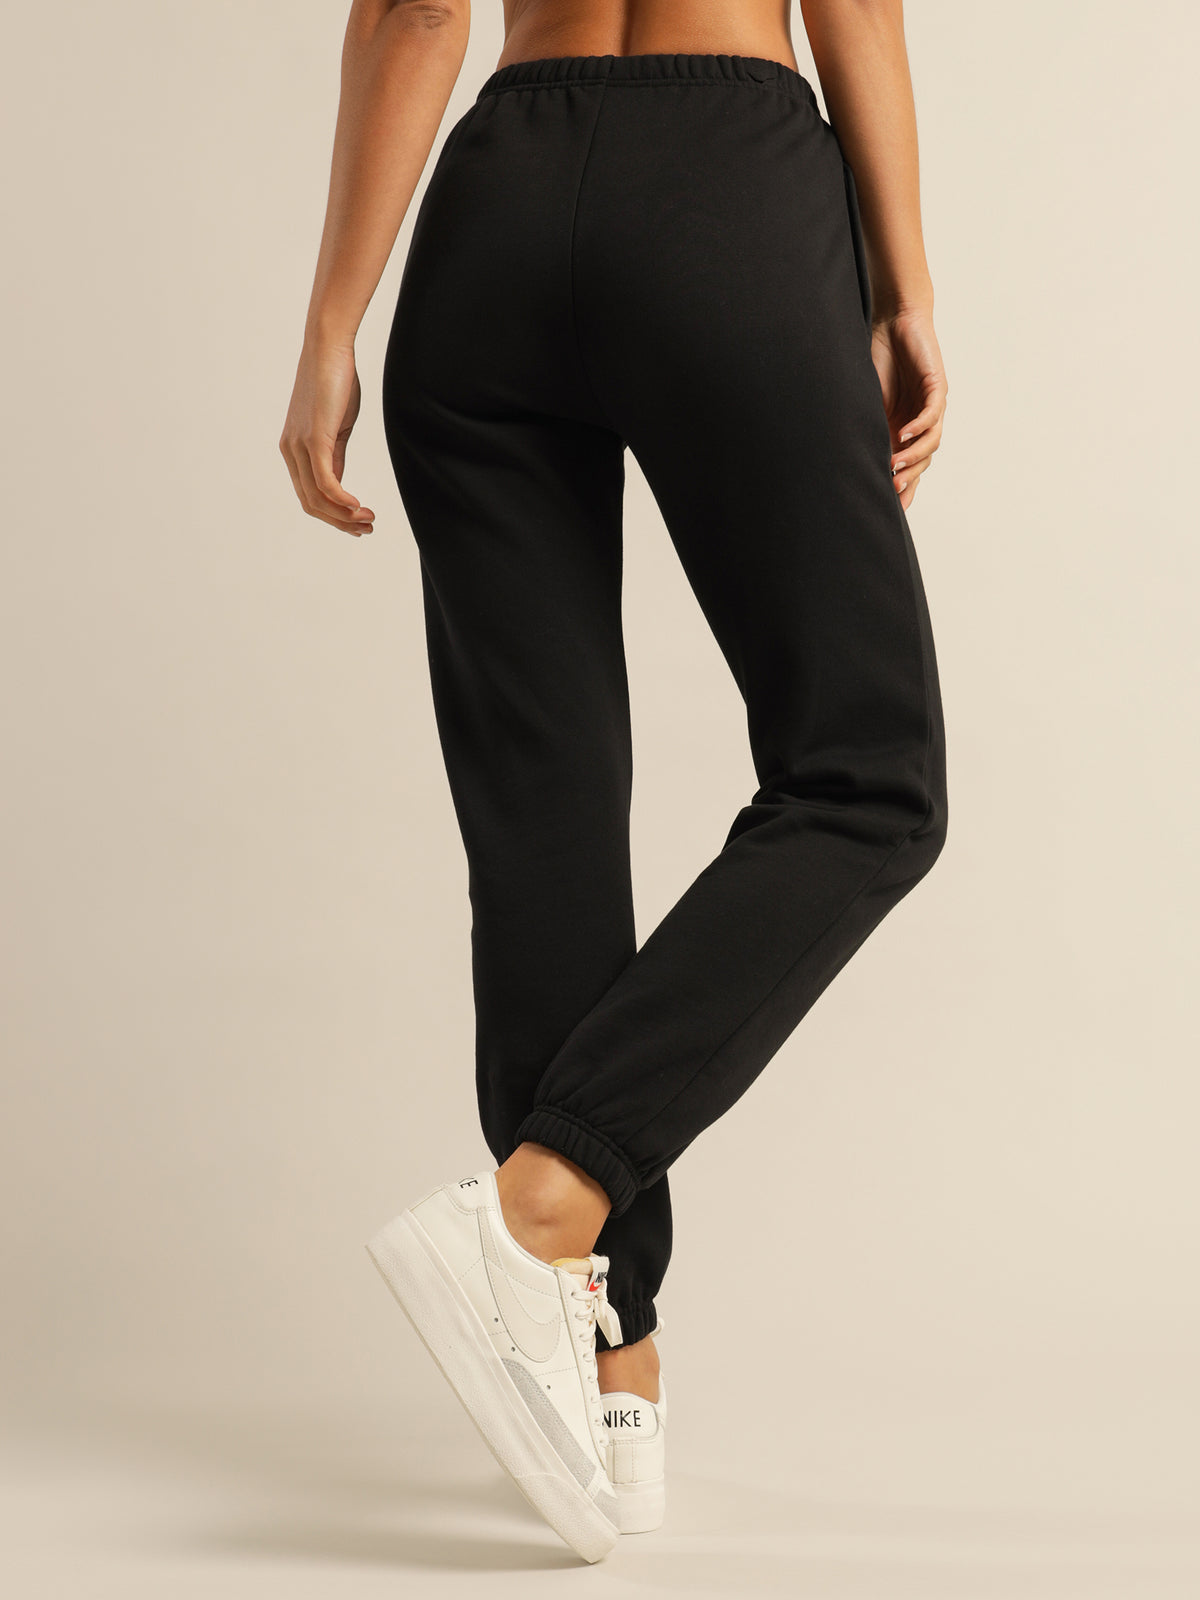 Reset Trackpants in Black